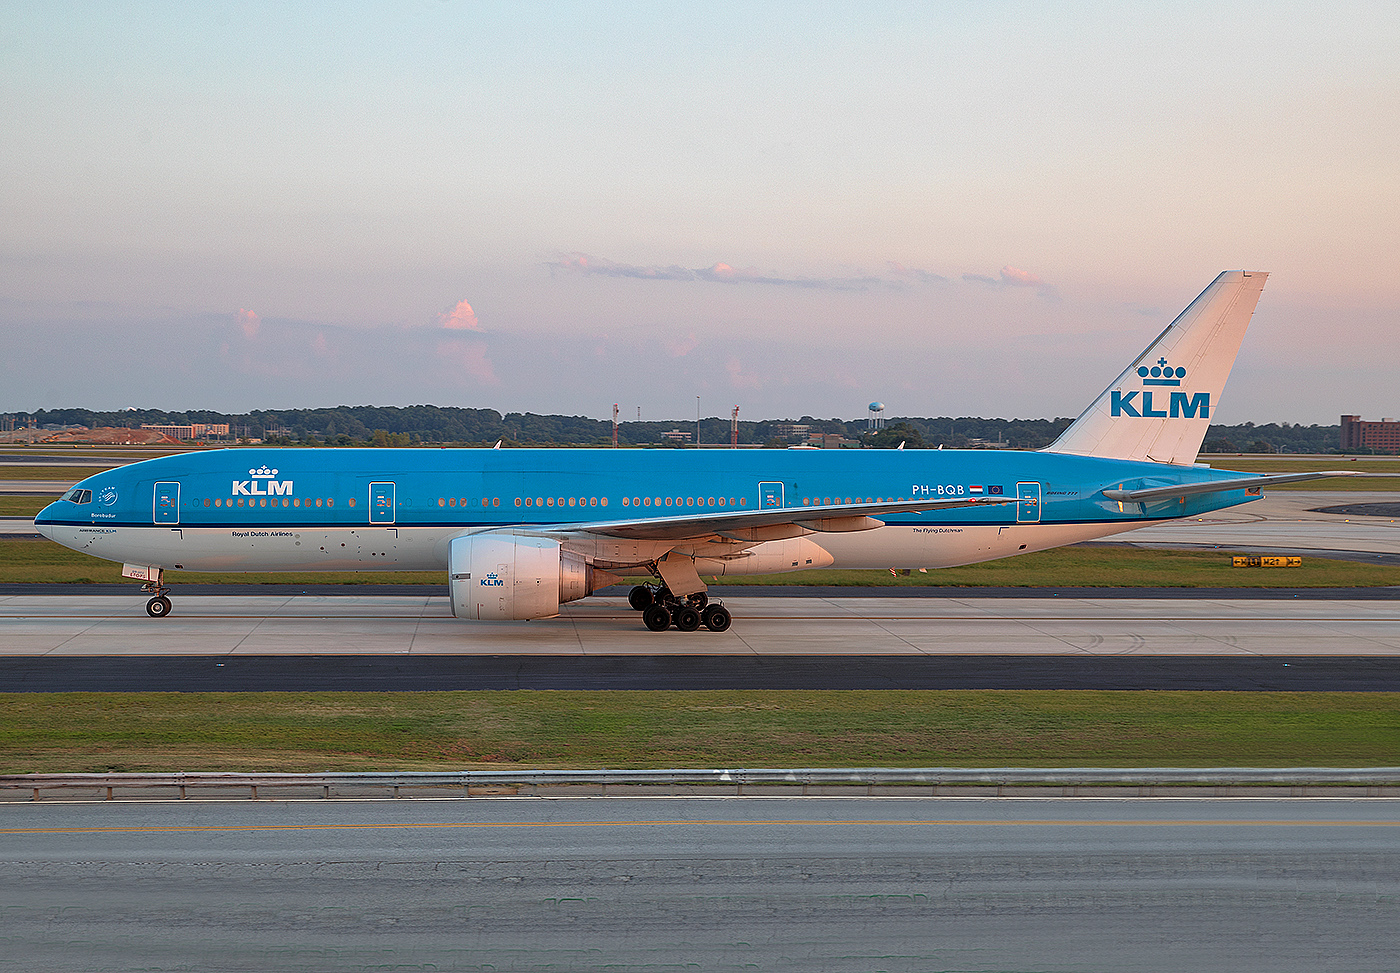 KLM pulls some US routes amid stricter travel restrictions